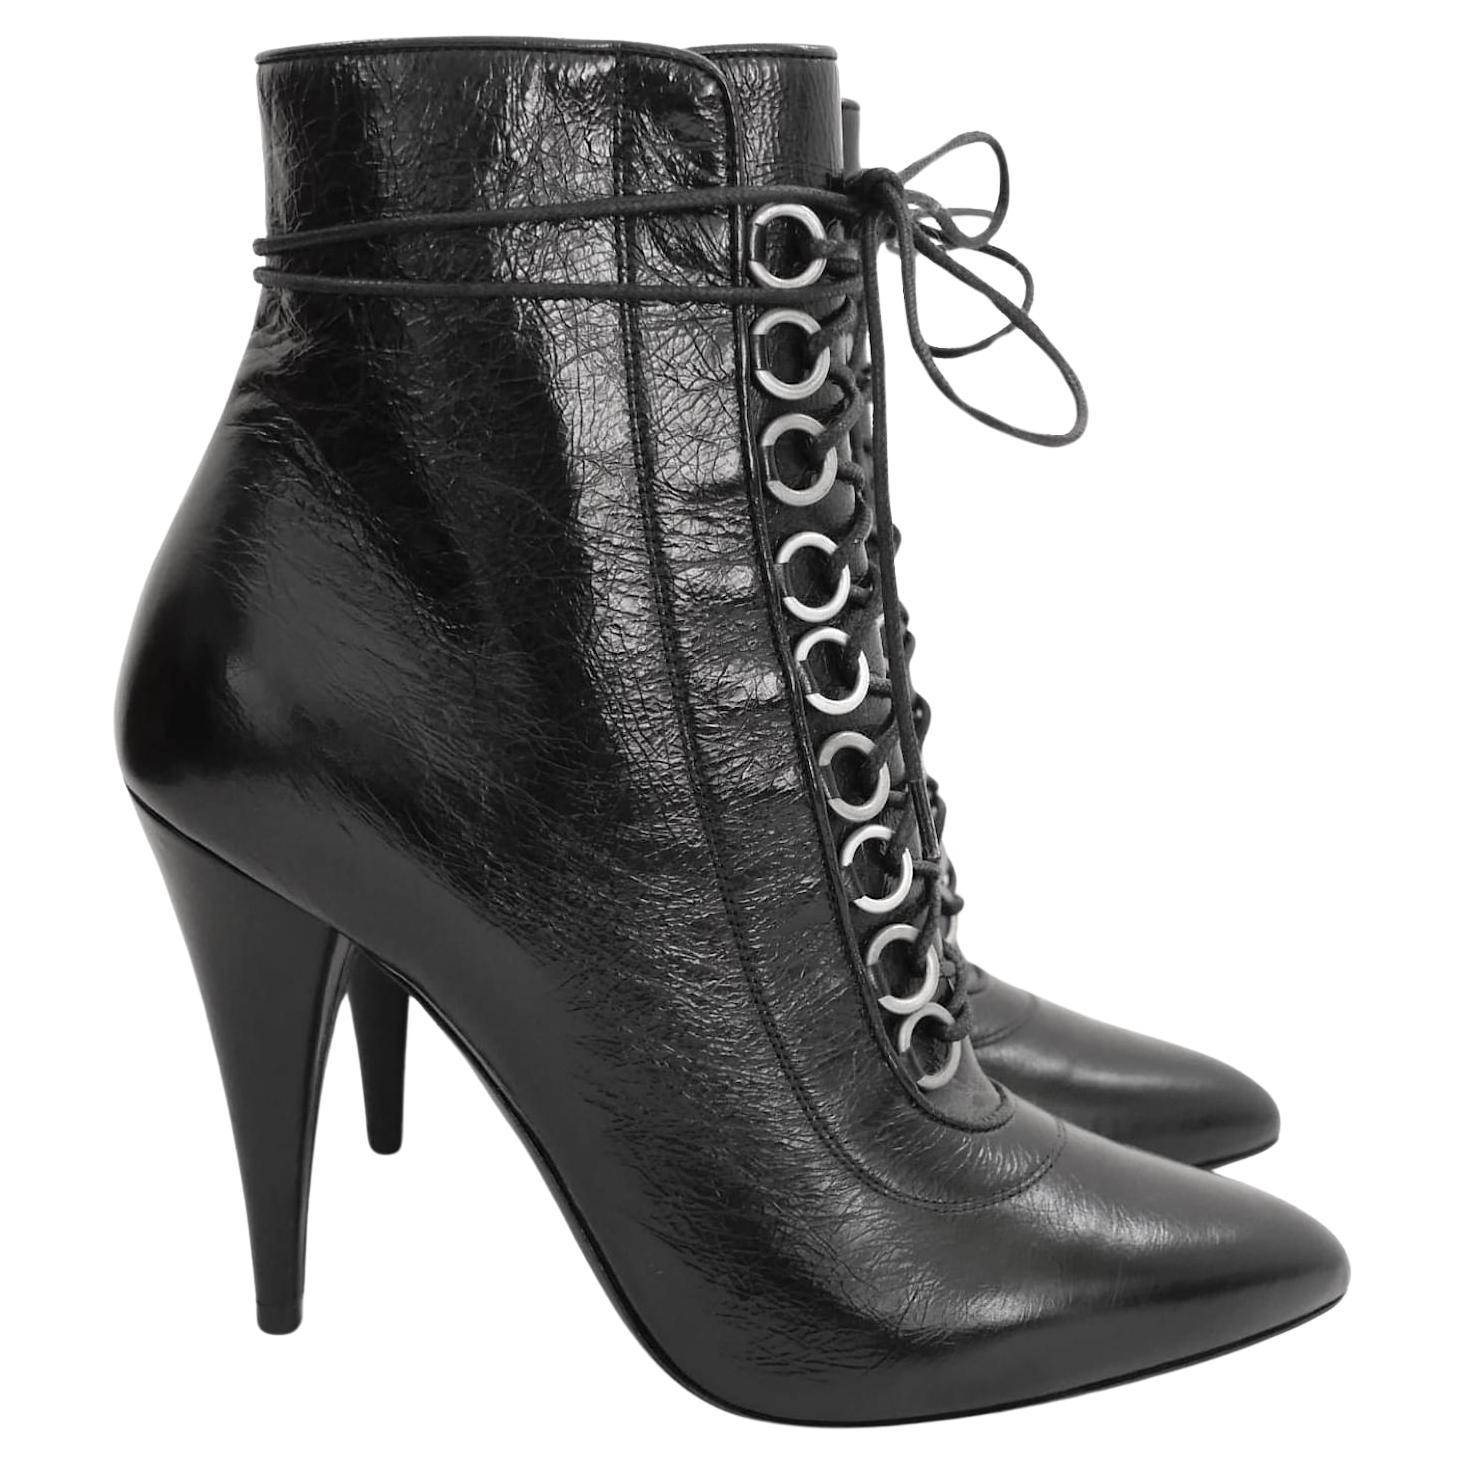 How do I care for Saint Laurent boots?